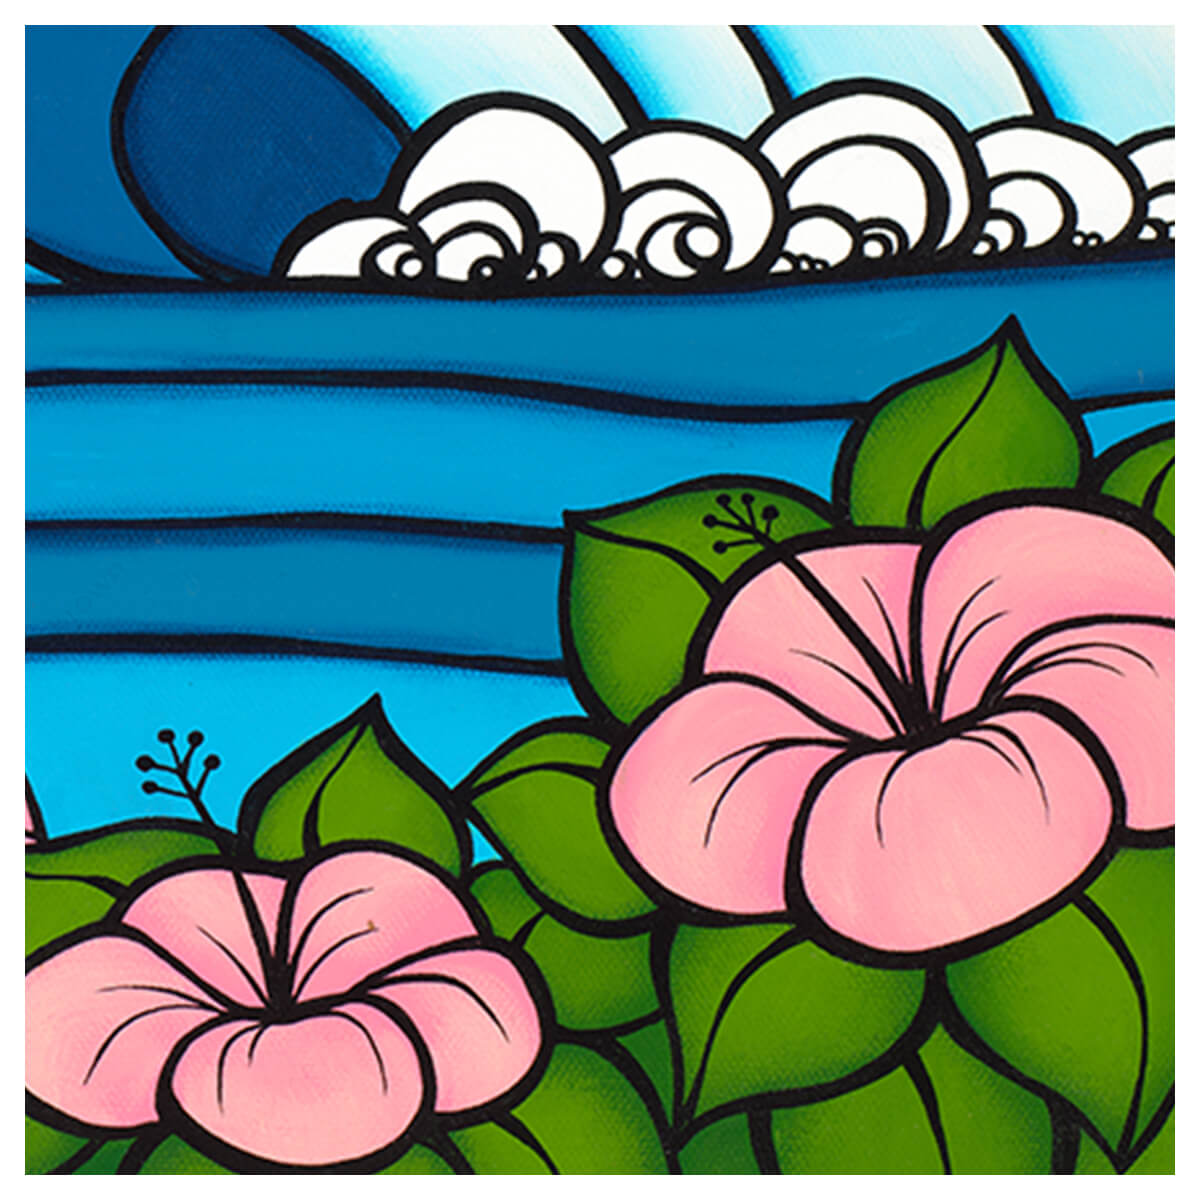 Colorful tropical canvas art by Kauai artist Heather Brown "Lazy Hibiscus" - pink flower detail